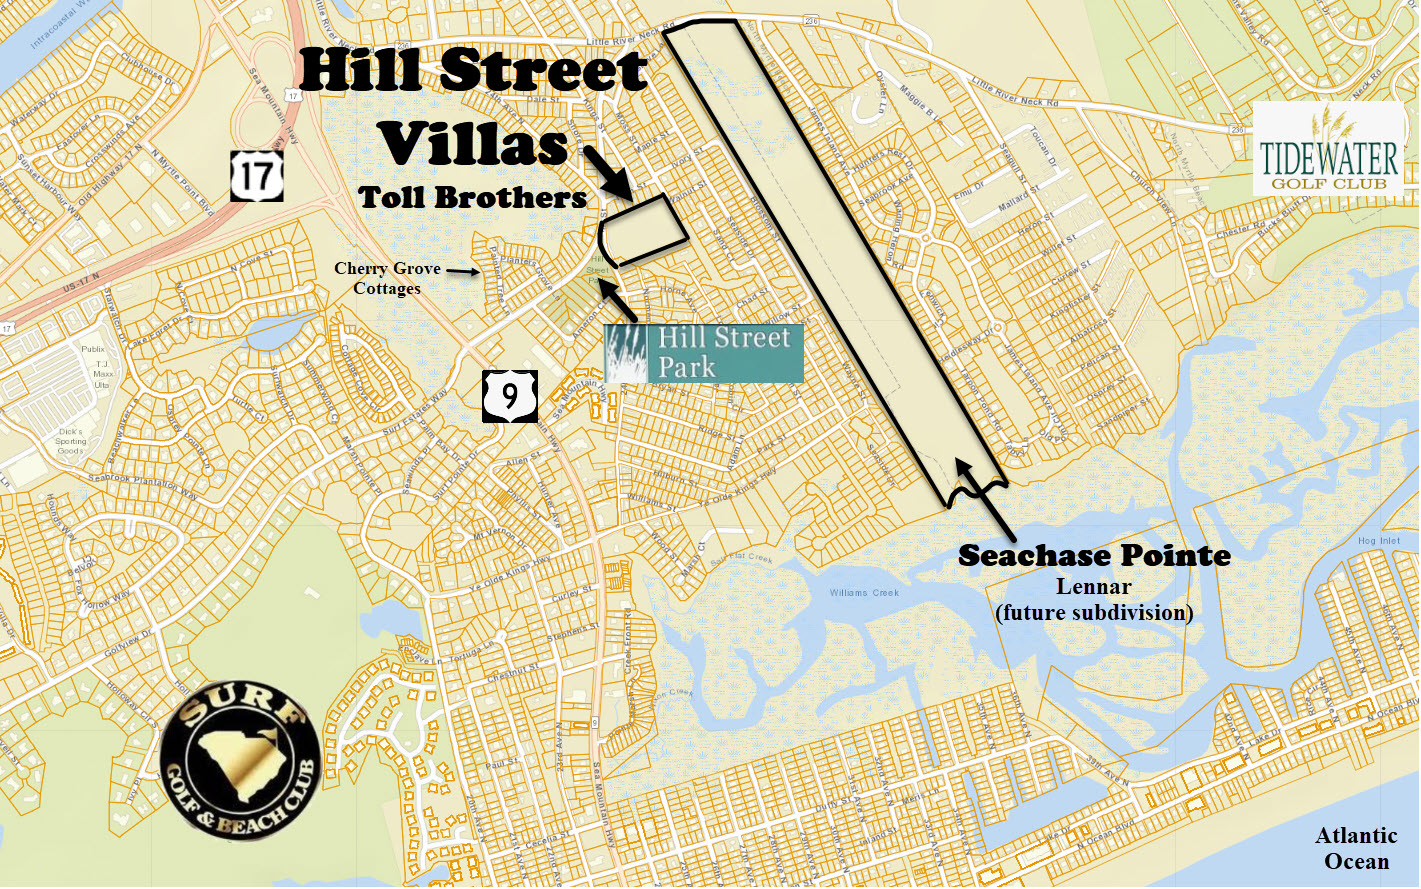 Hill Street Villas is a new home community in North Myrtle Beach that will be developed by Toll Brothers. 